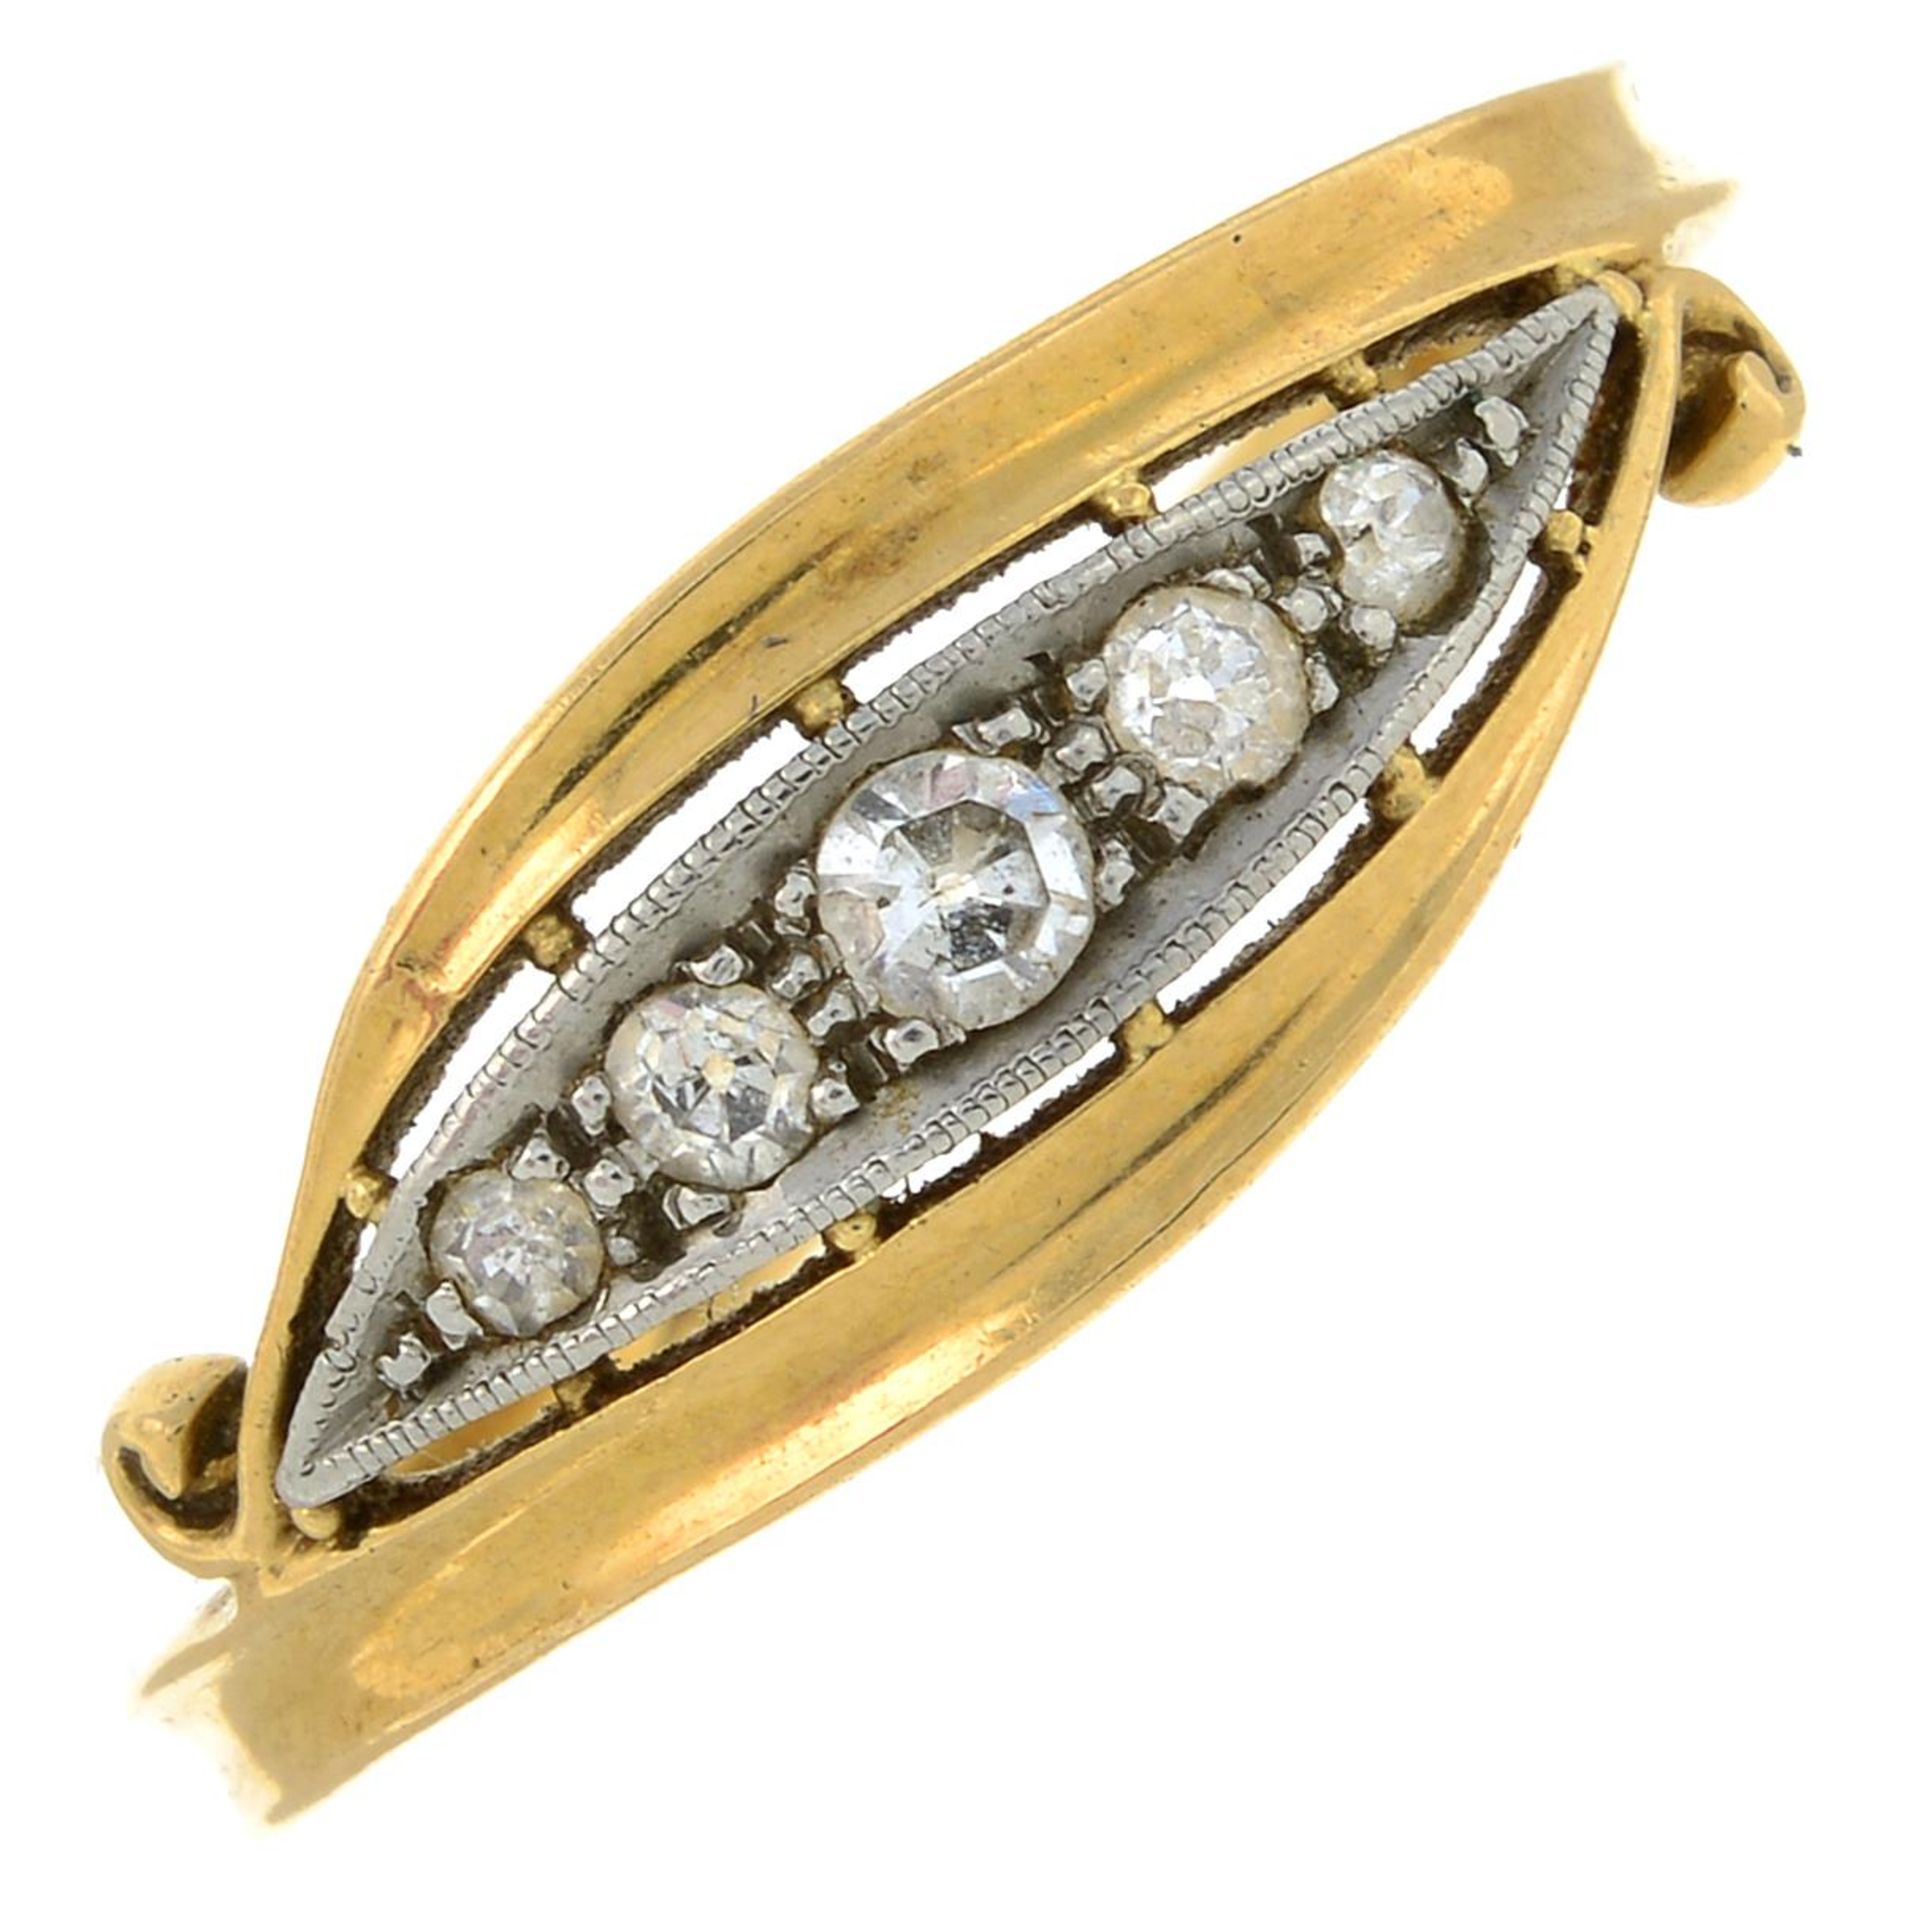 An early 20th century 18ct gold diamond ring.Estimated total diamond weight 0.10ct.